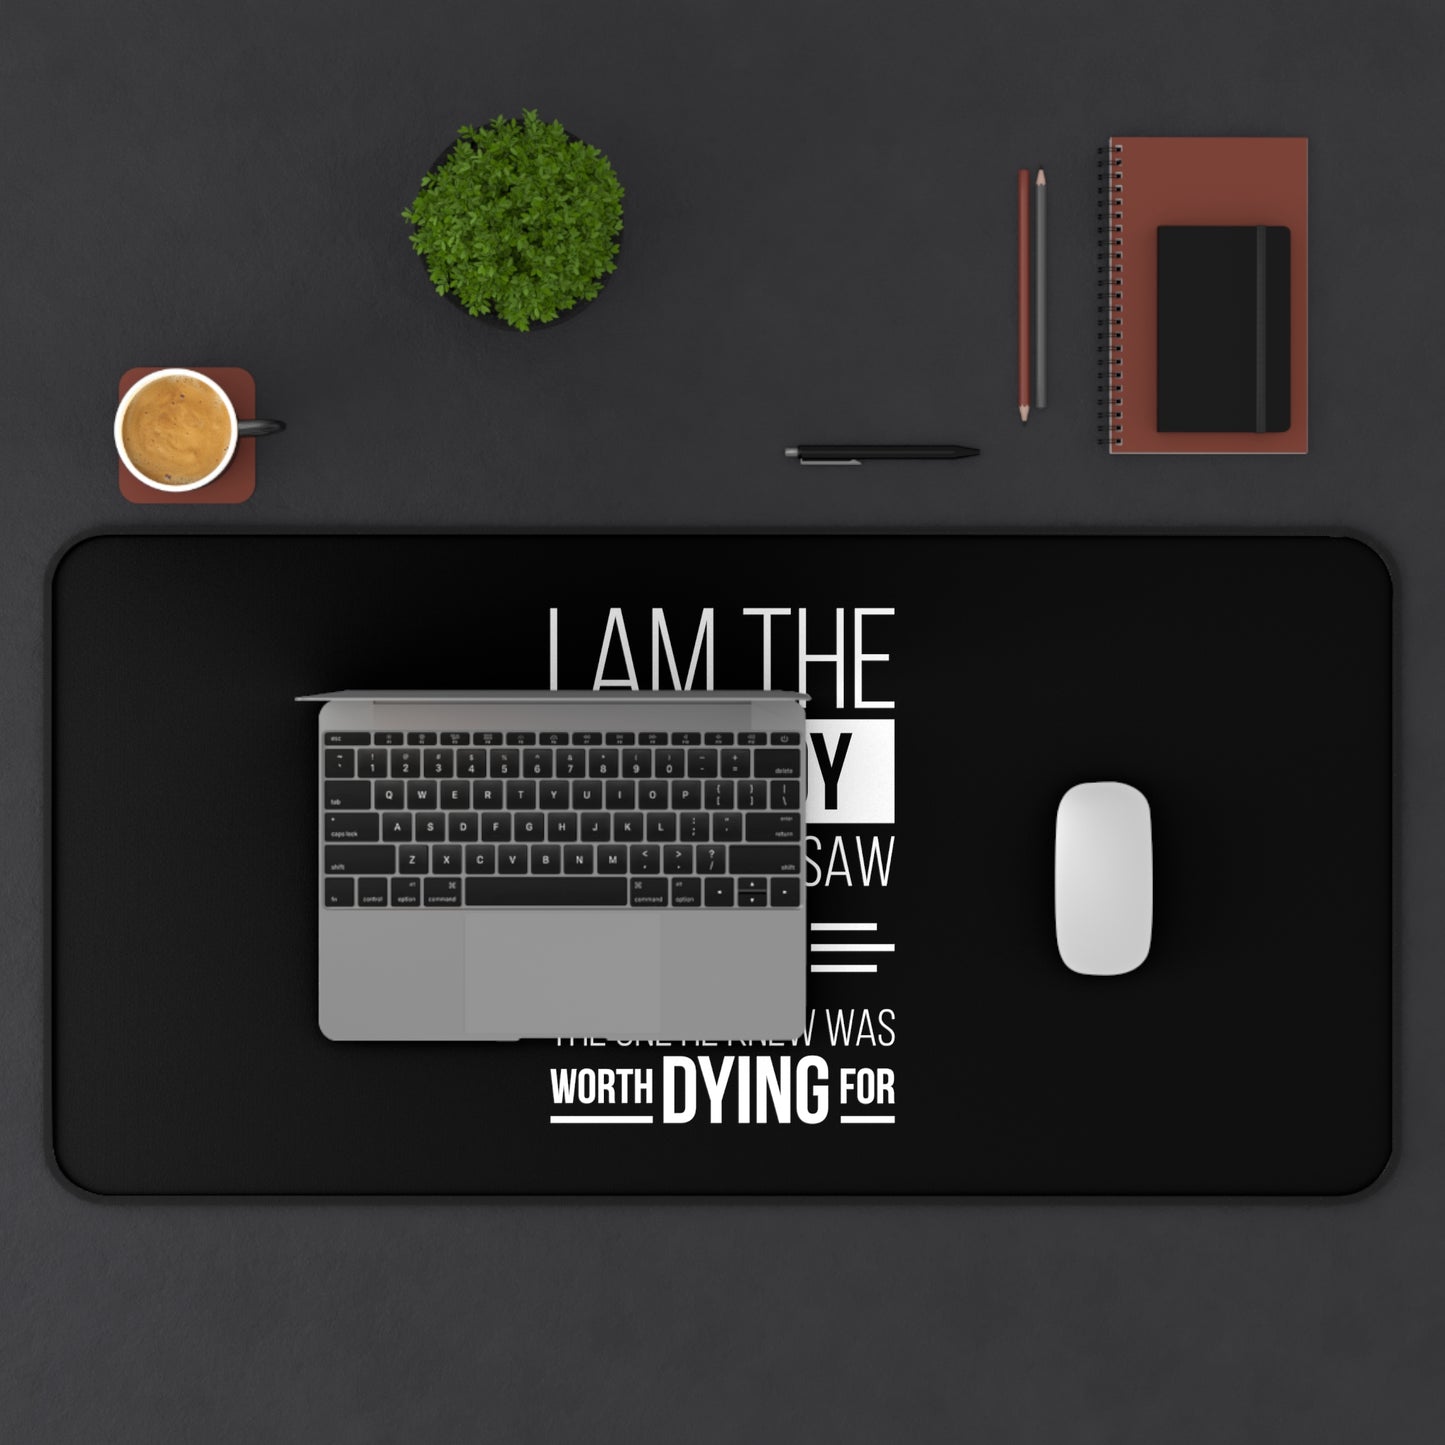 I Am The Nobody The World Saw But The One He Knew Was Worth Dying For Christian Computer Keyboard Mouse Desk Mat